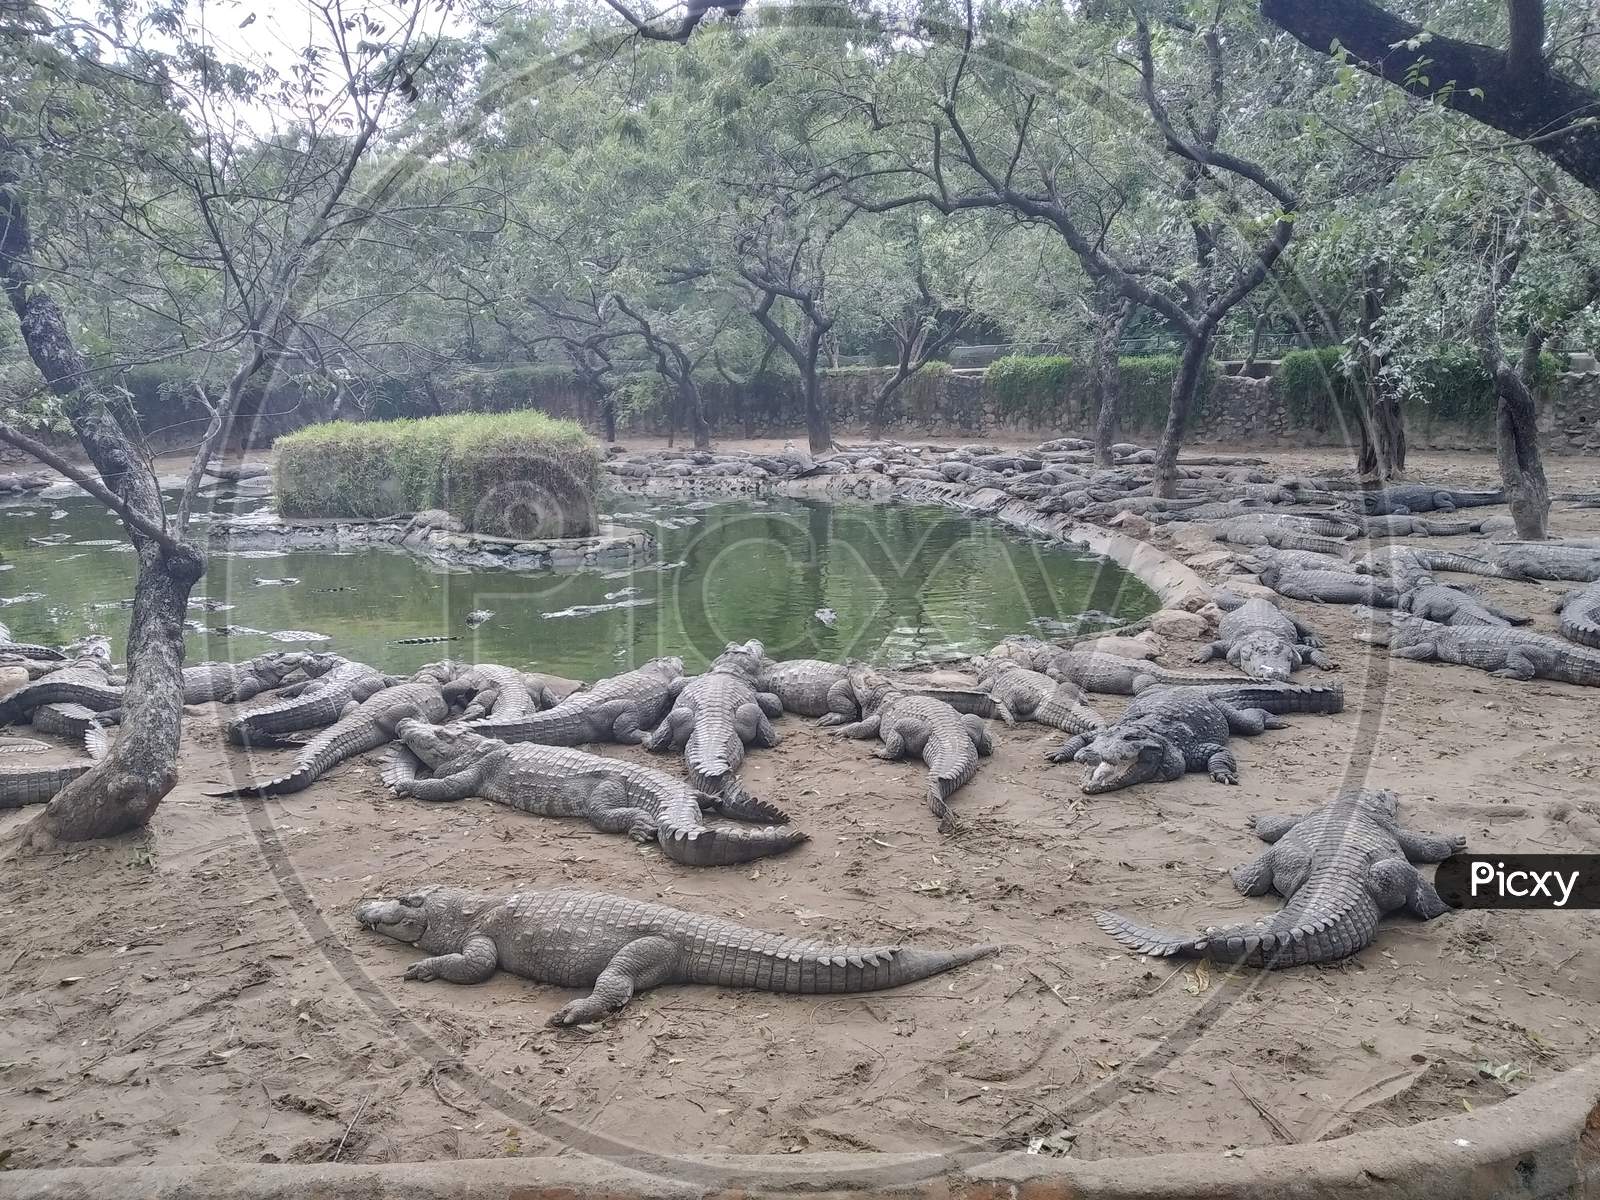 Crocodiles relaxing at the park